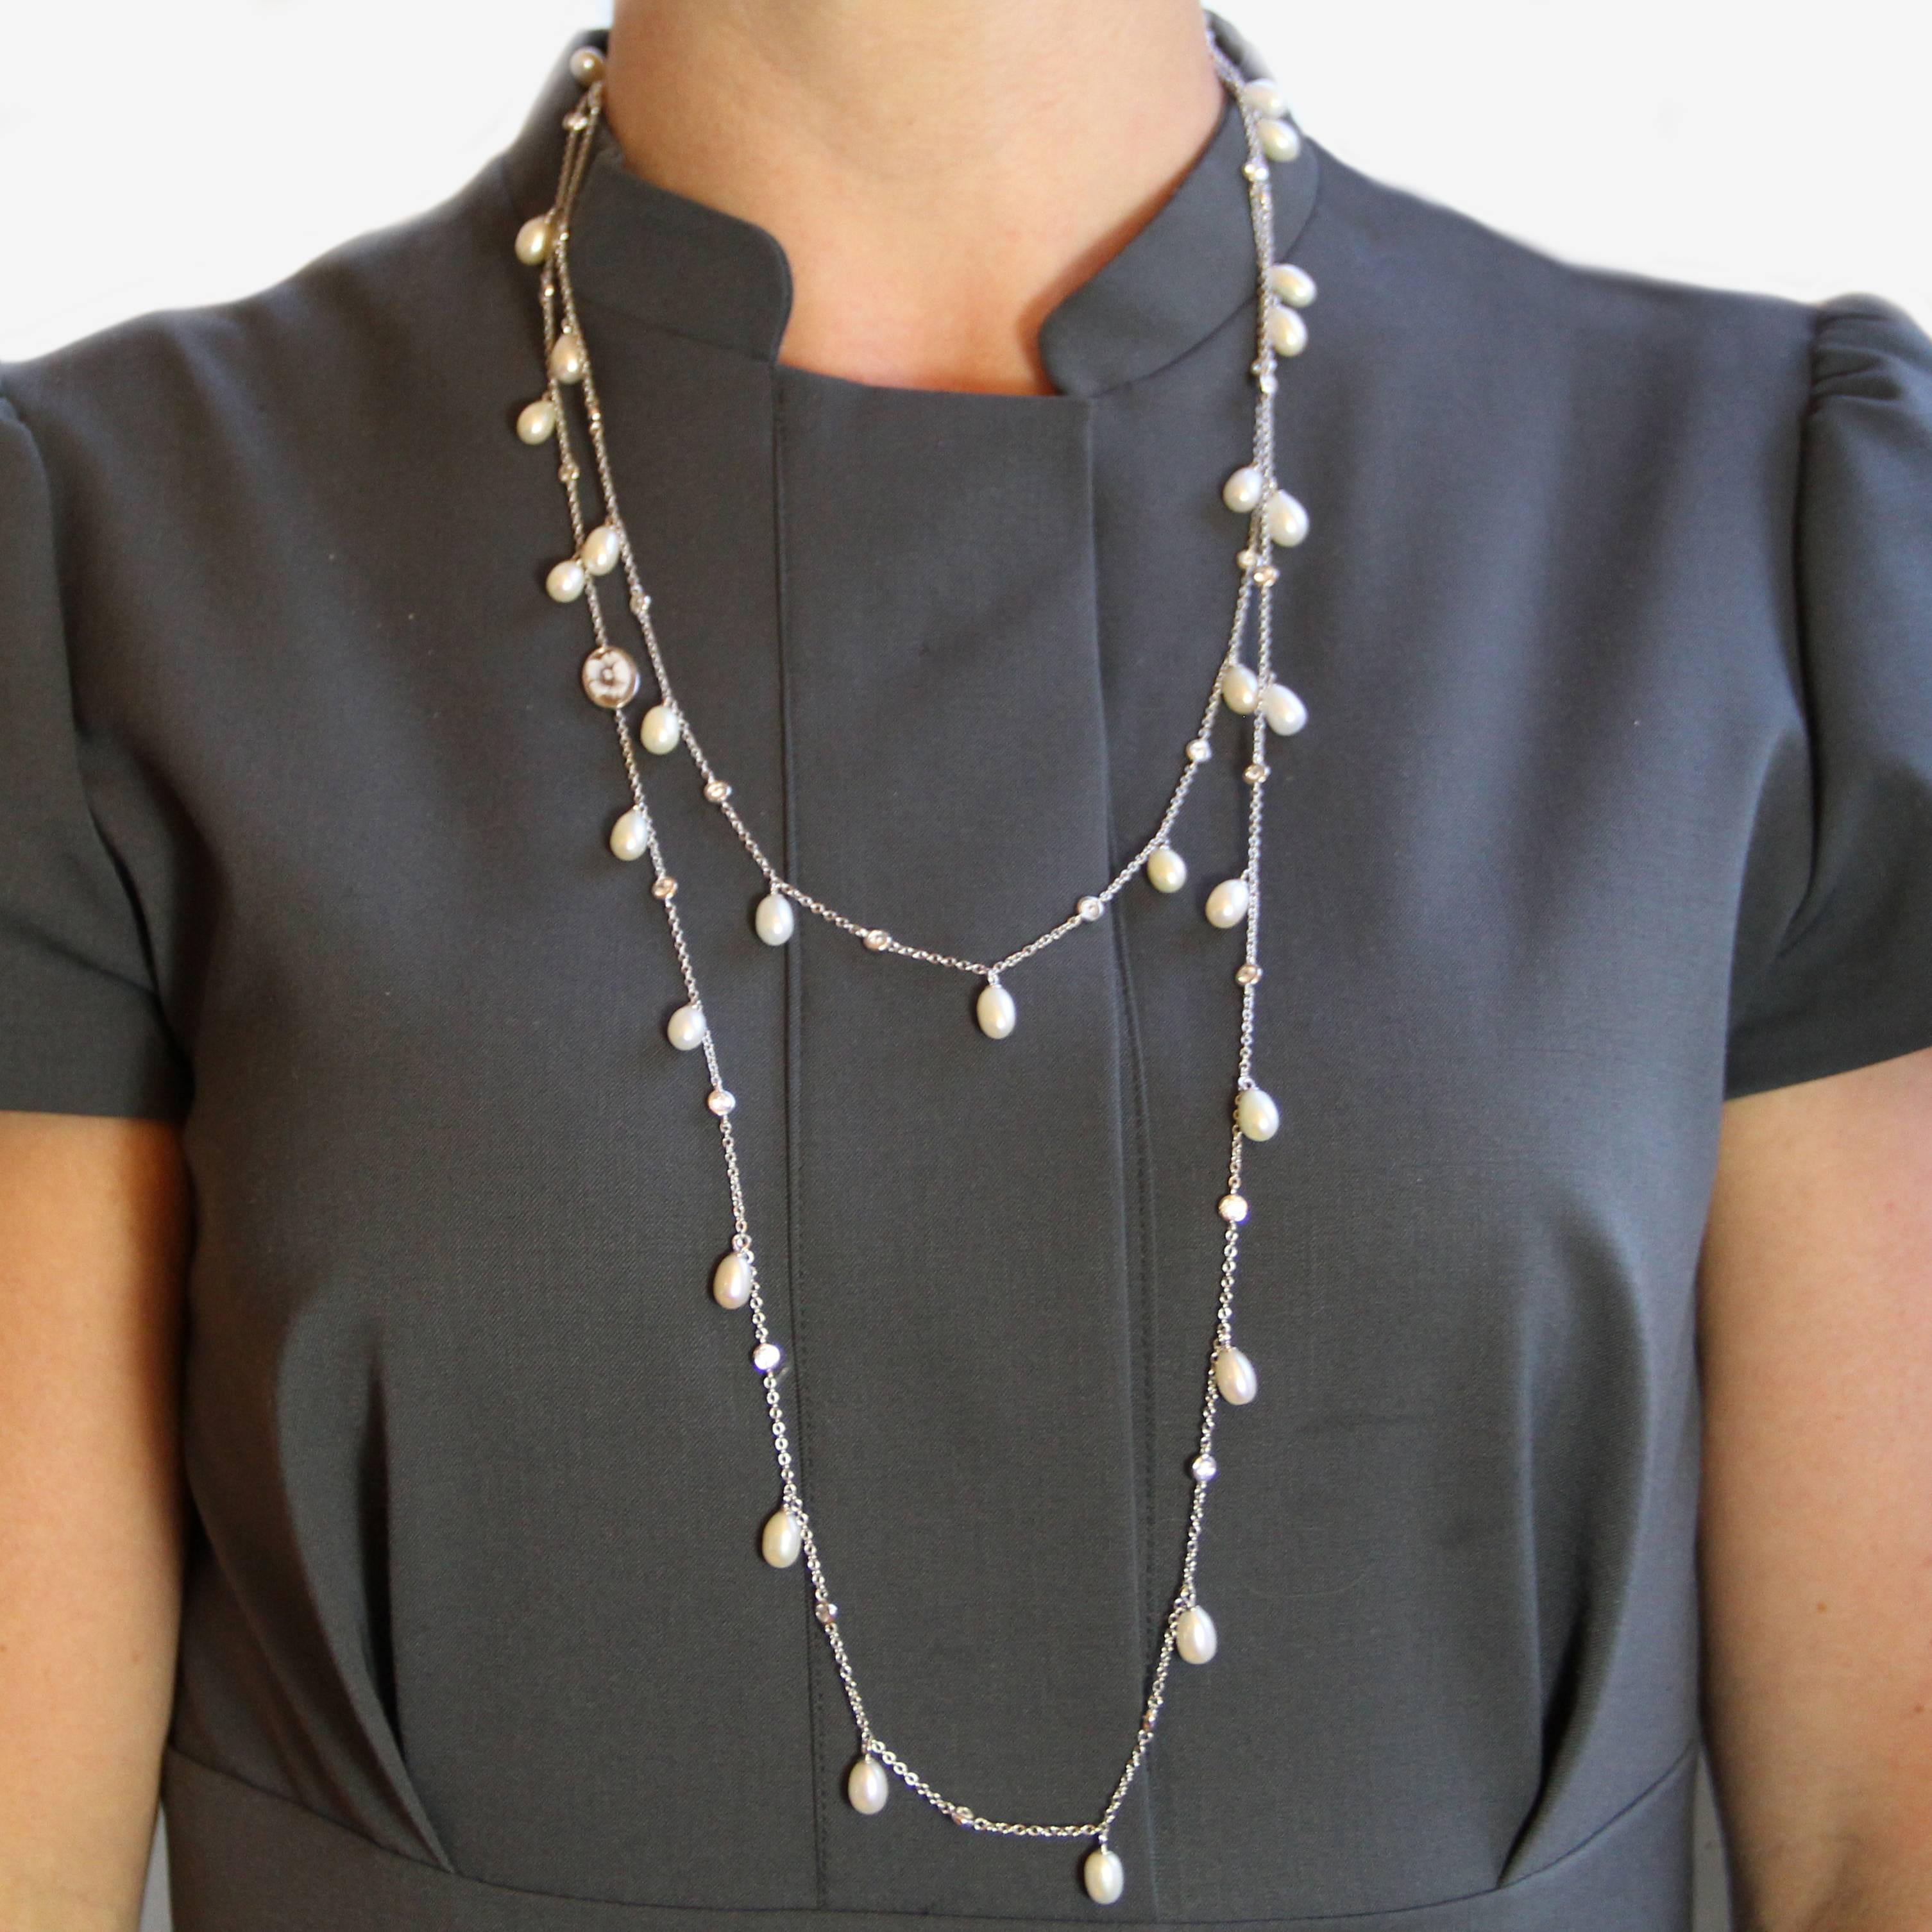 Necklace in vermeil, silver 925 thousandths and white gold.
This splendid white vermeil necklace is made of a jaseron mesh punctuated with olive cultured pearls? crystals in closed setting and a cameo on seashell representing a flower. This silver